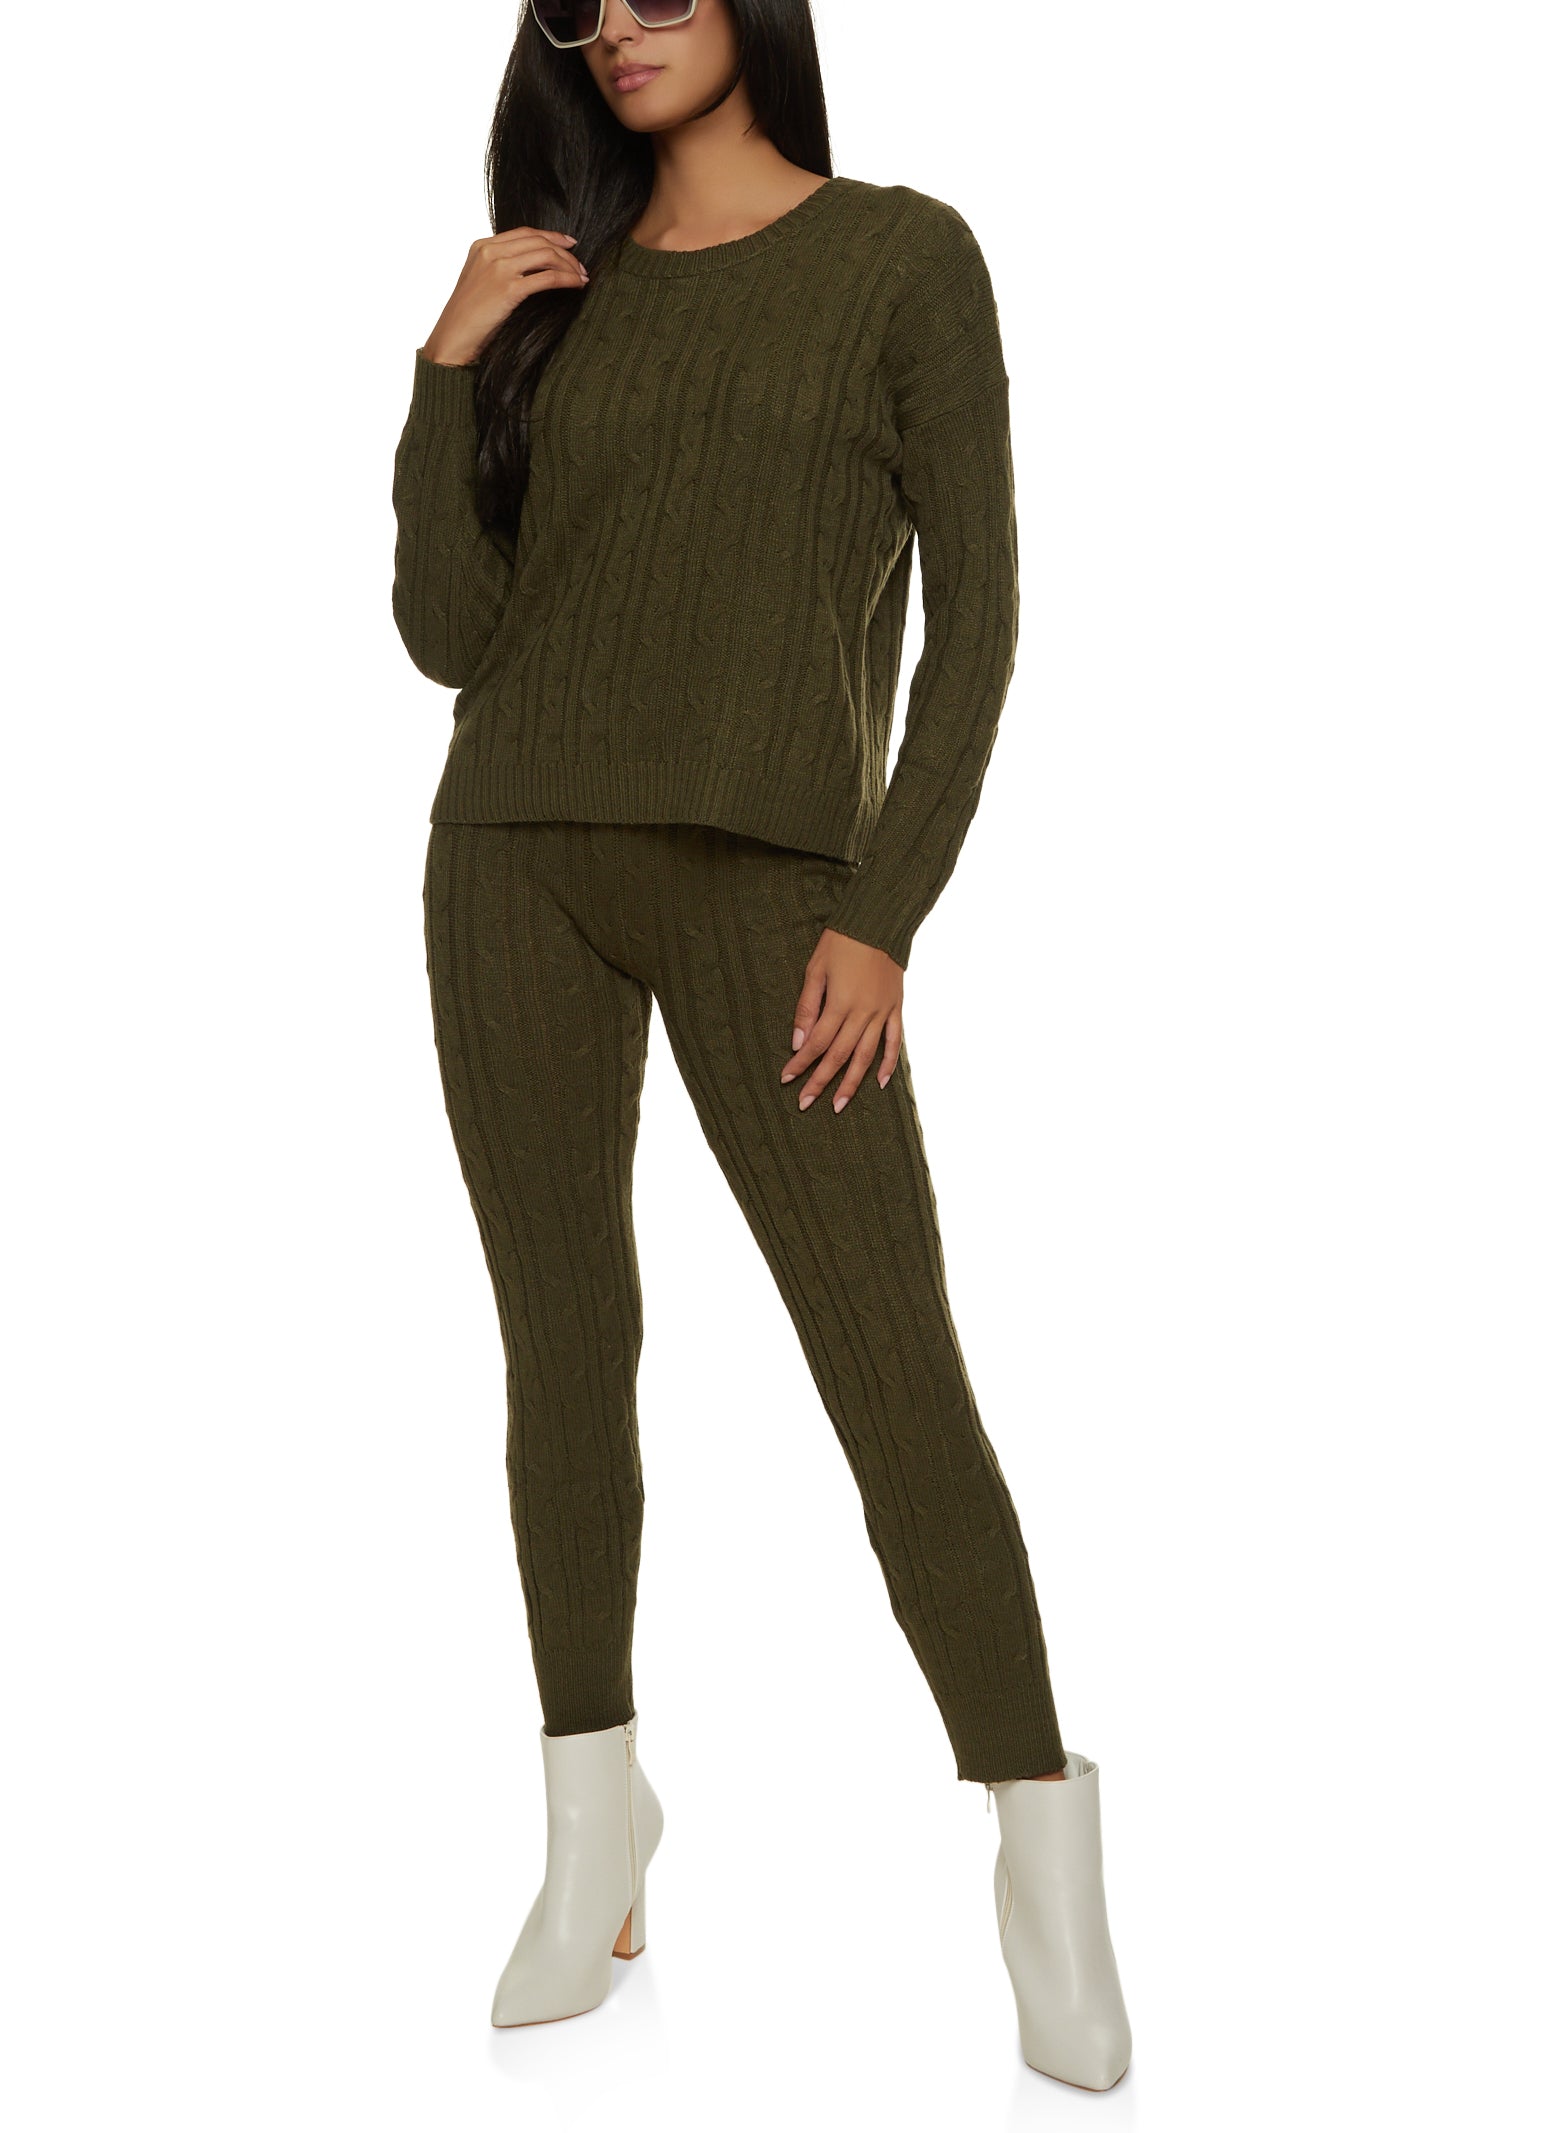 Cable Knit Crew Neck Sweater and Leggings Set - Olive